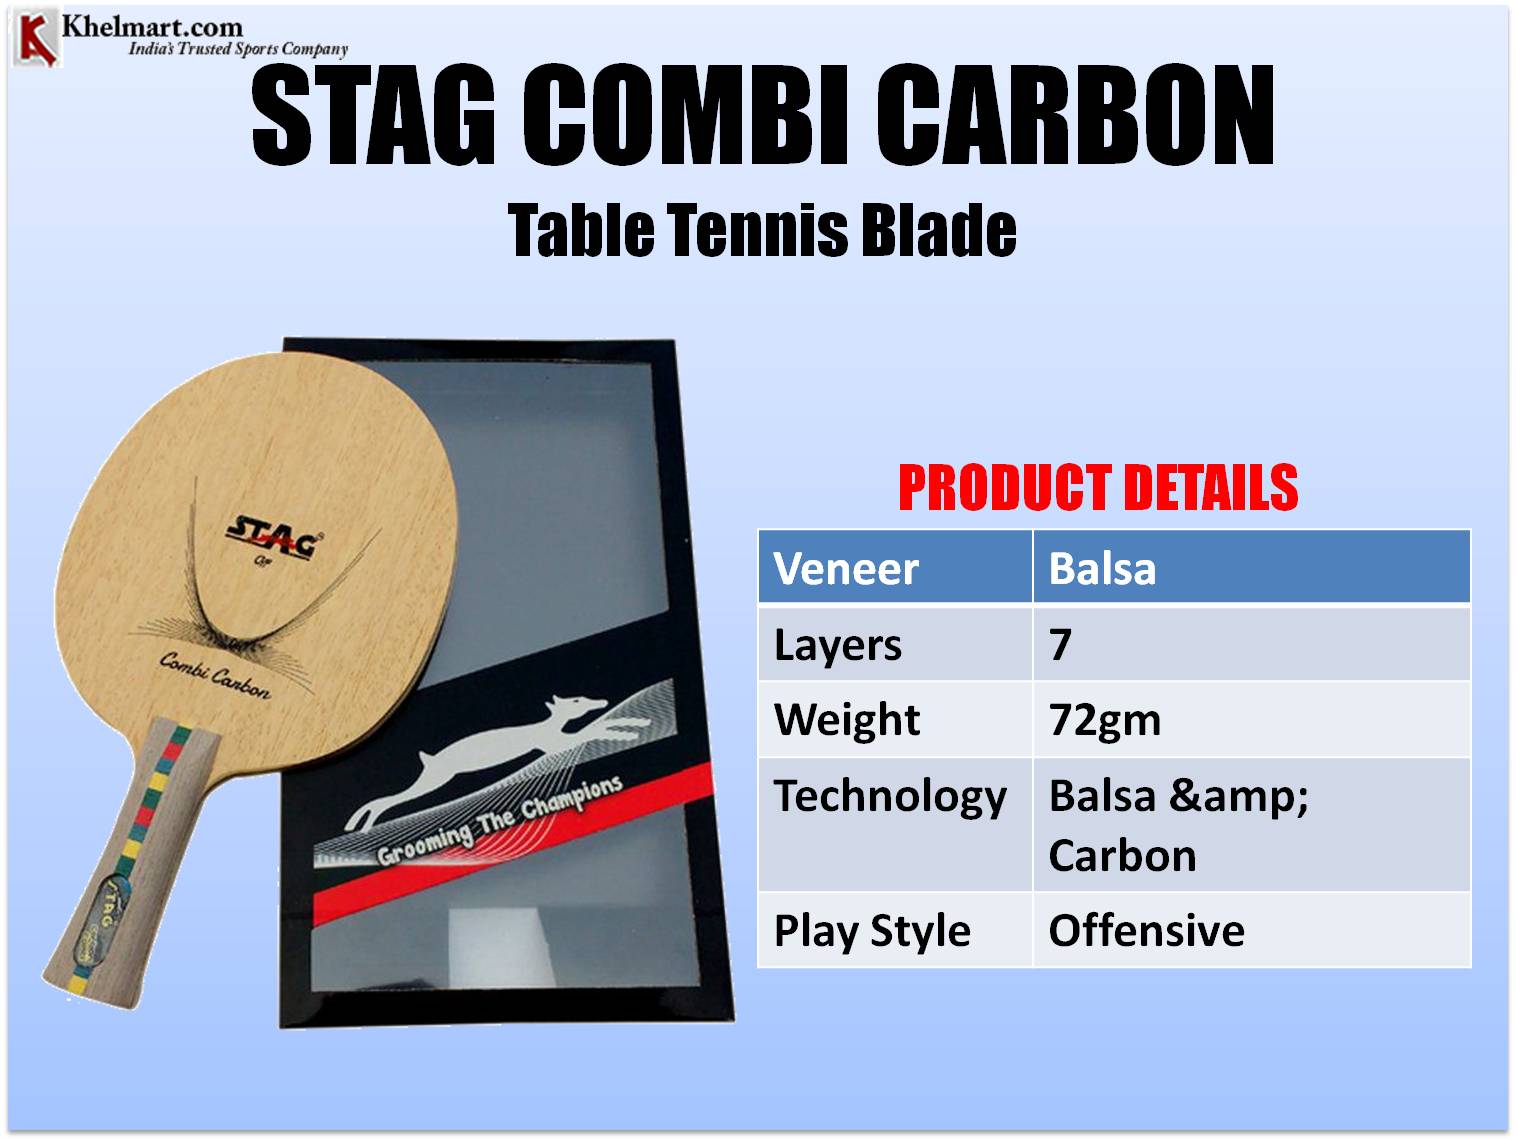 STAG_COMBI_CARBON_Table_Tennis_Blade.jpg